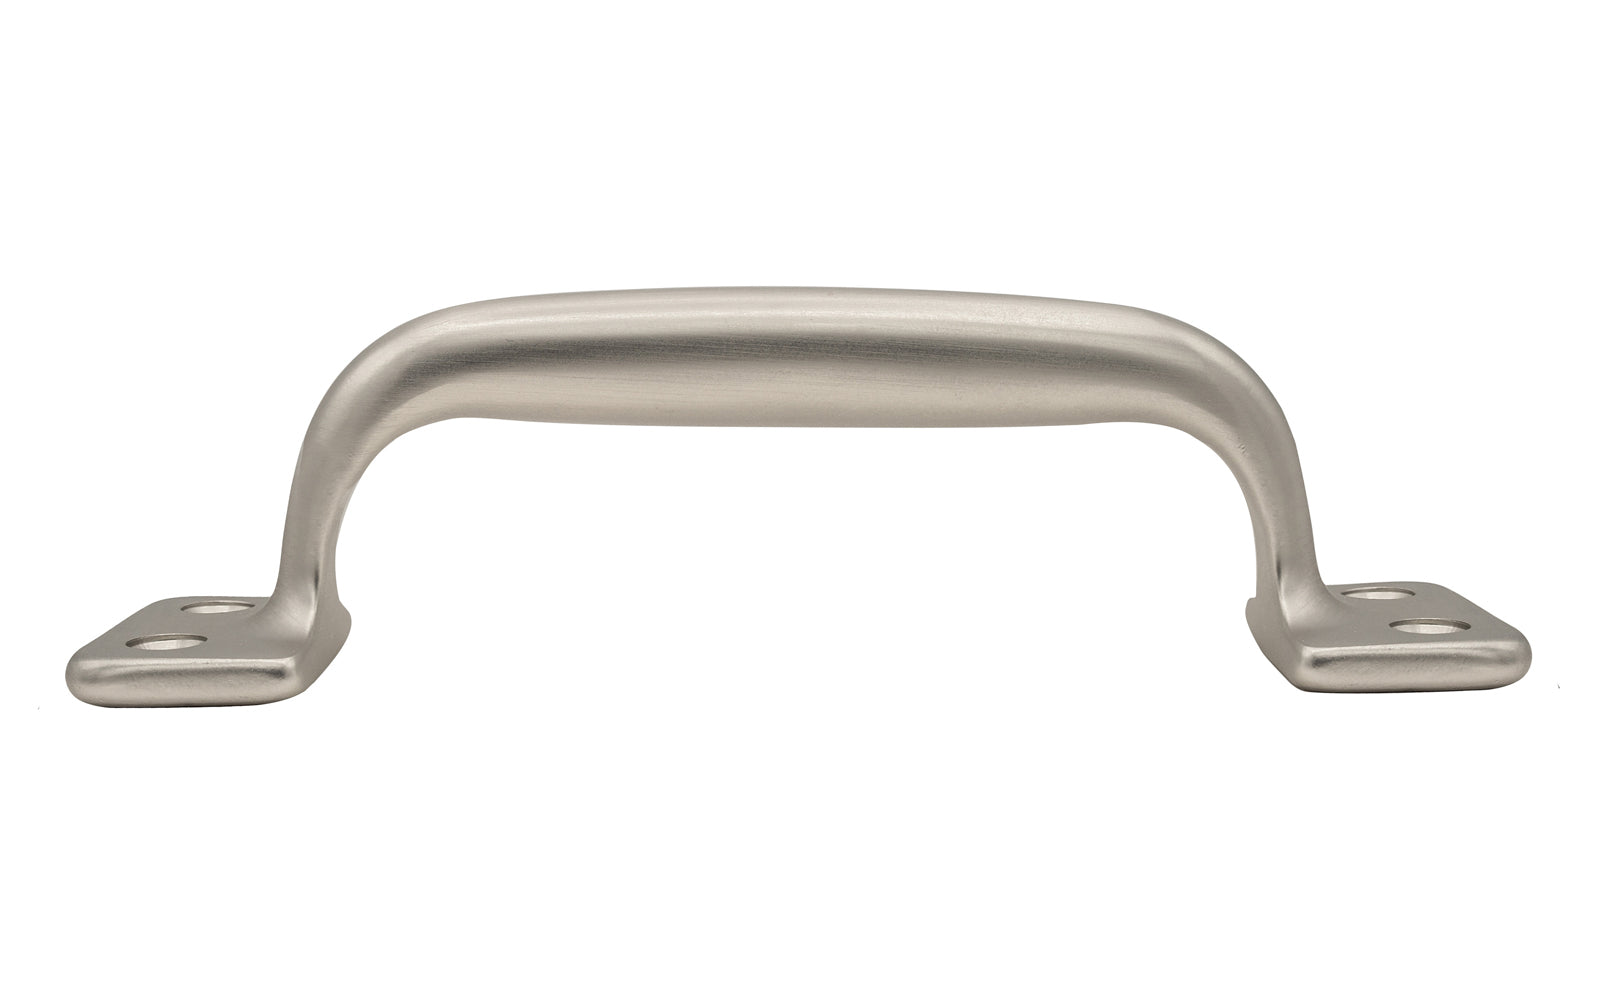 Vintage-style Hardware · Classic Solid Brass Handle Pull ~ 4-3/8" On Centers. Versatile handle is great for sash windows, cabinets, drawers, file cabinets. Arts & Crafts handle pull. Brushed Nickel Finish.